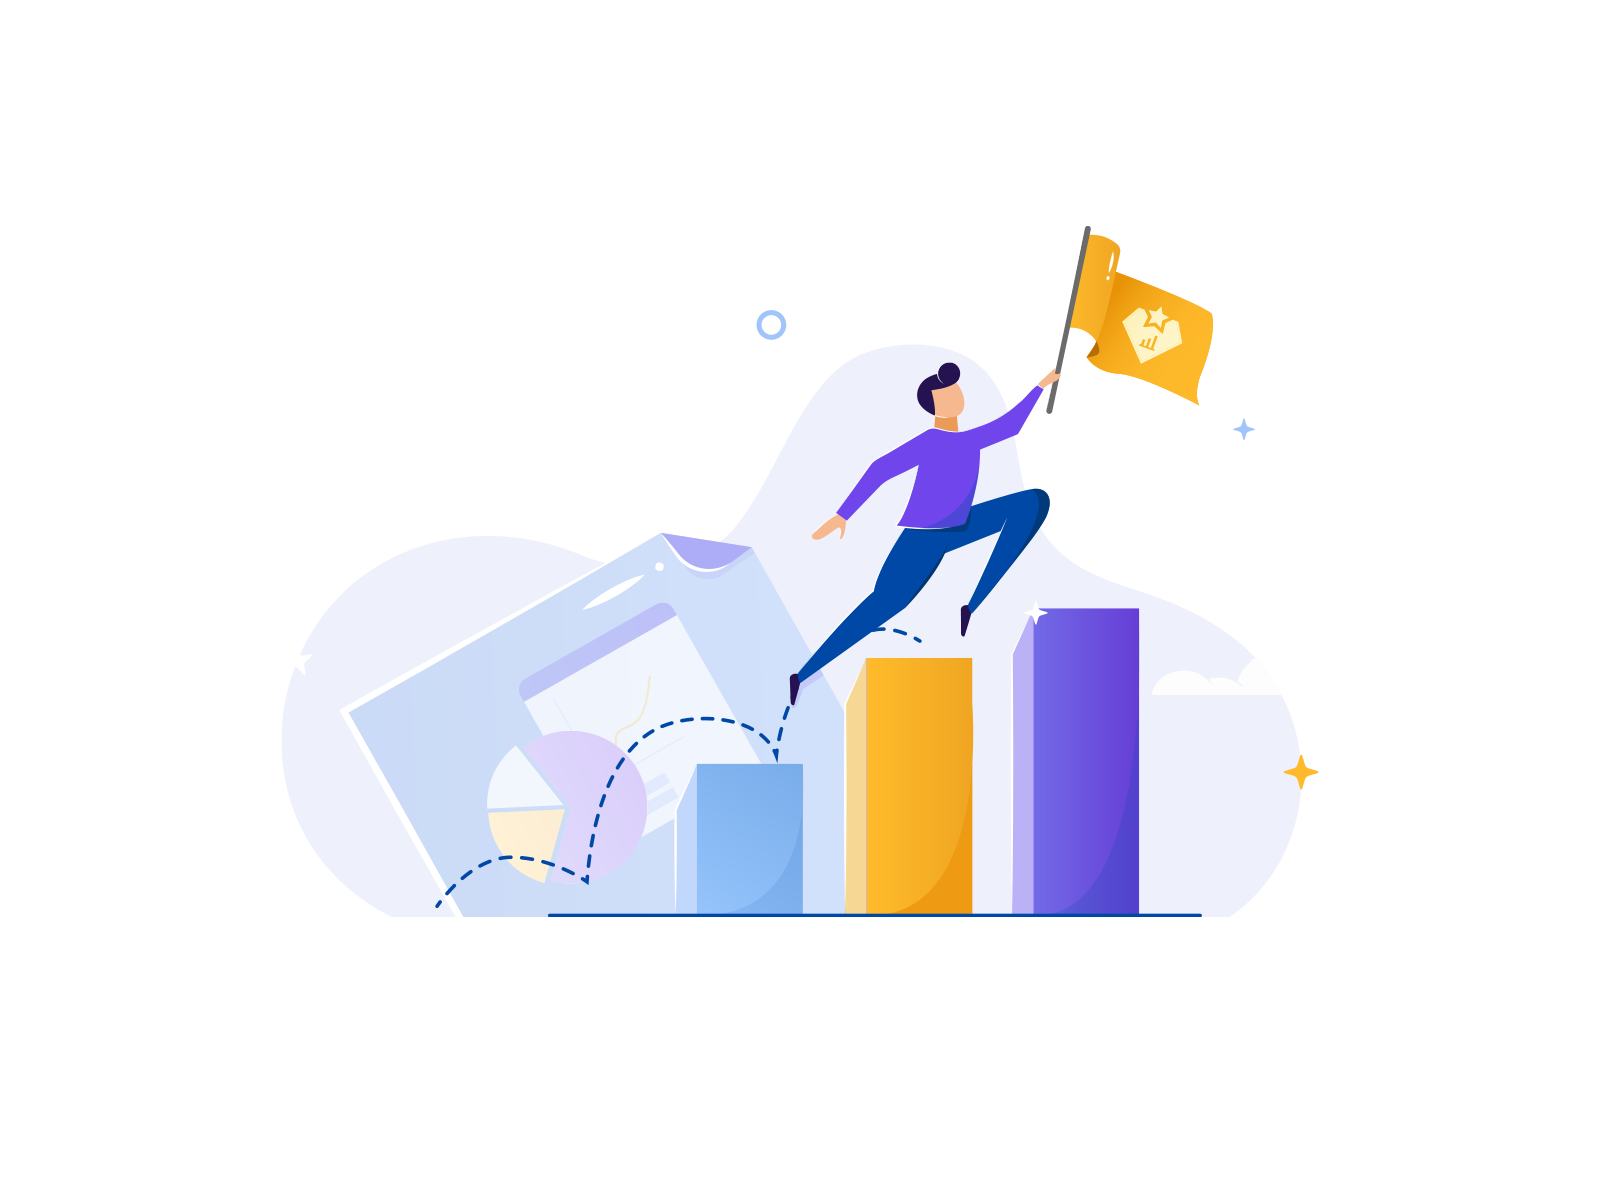 Super Funds - Benefits of multiple mutual funds in one fund adobe adobe illustrator design digital digital art funds illustration illustrator mutual funds onboarding onboarding illustration purple yellow